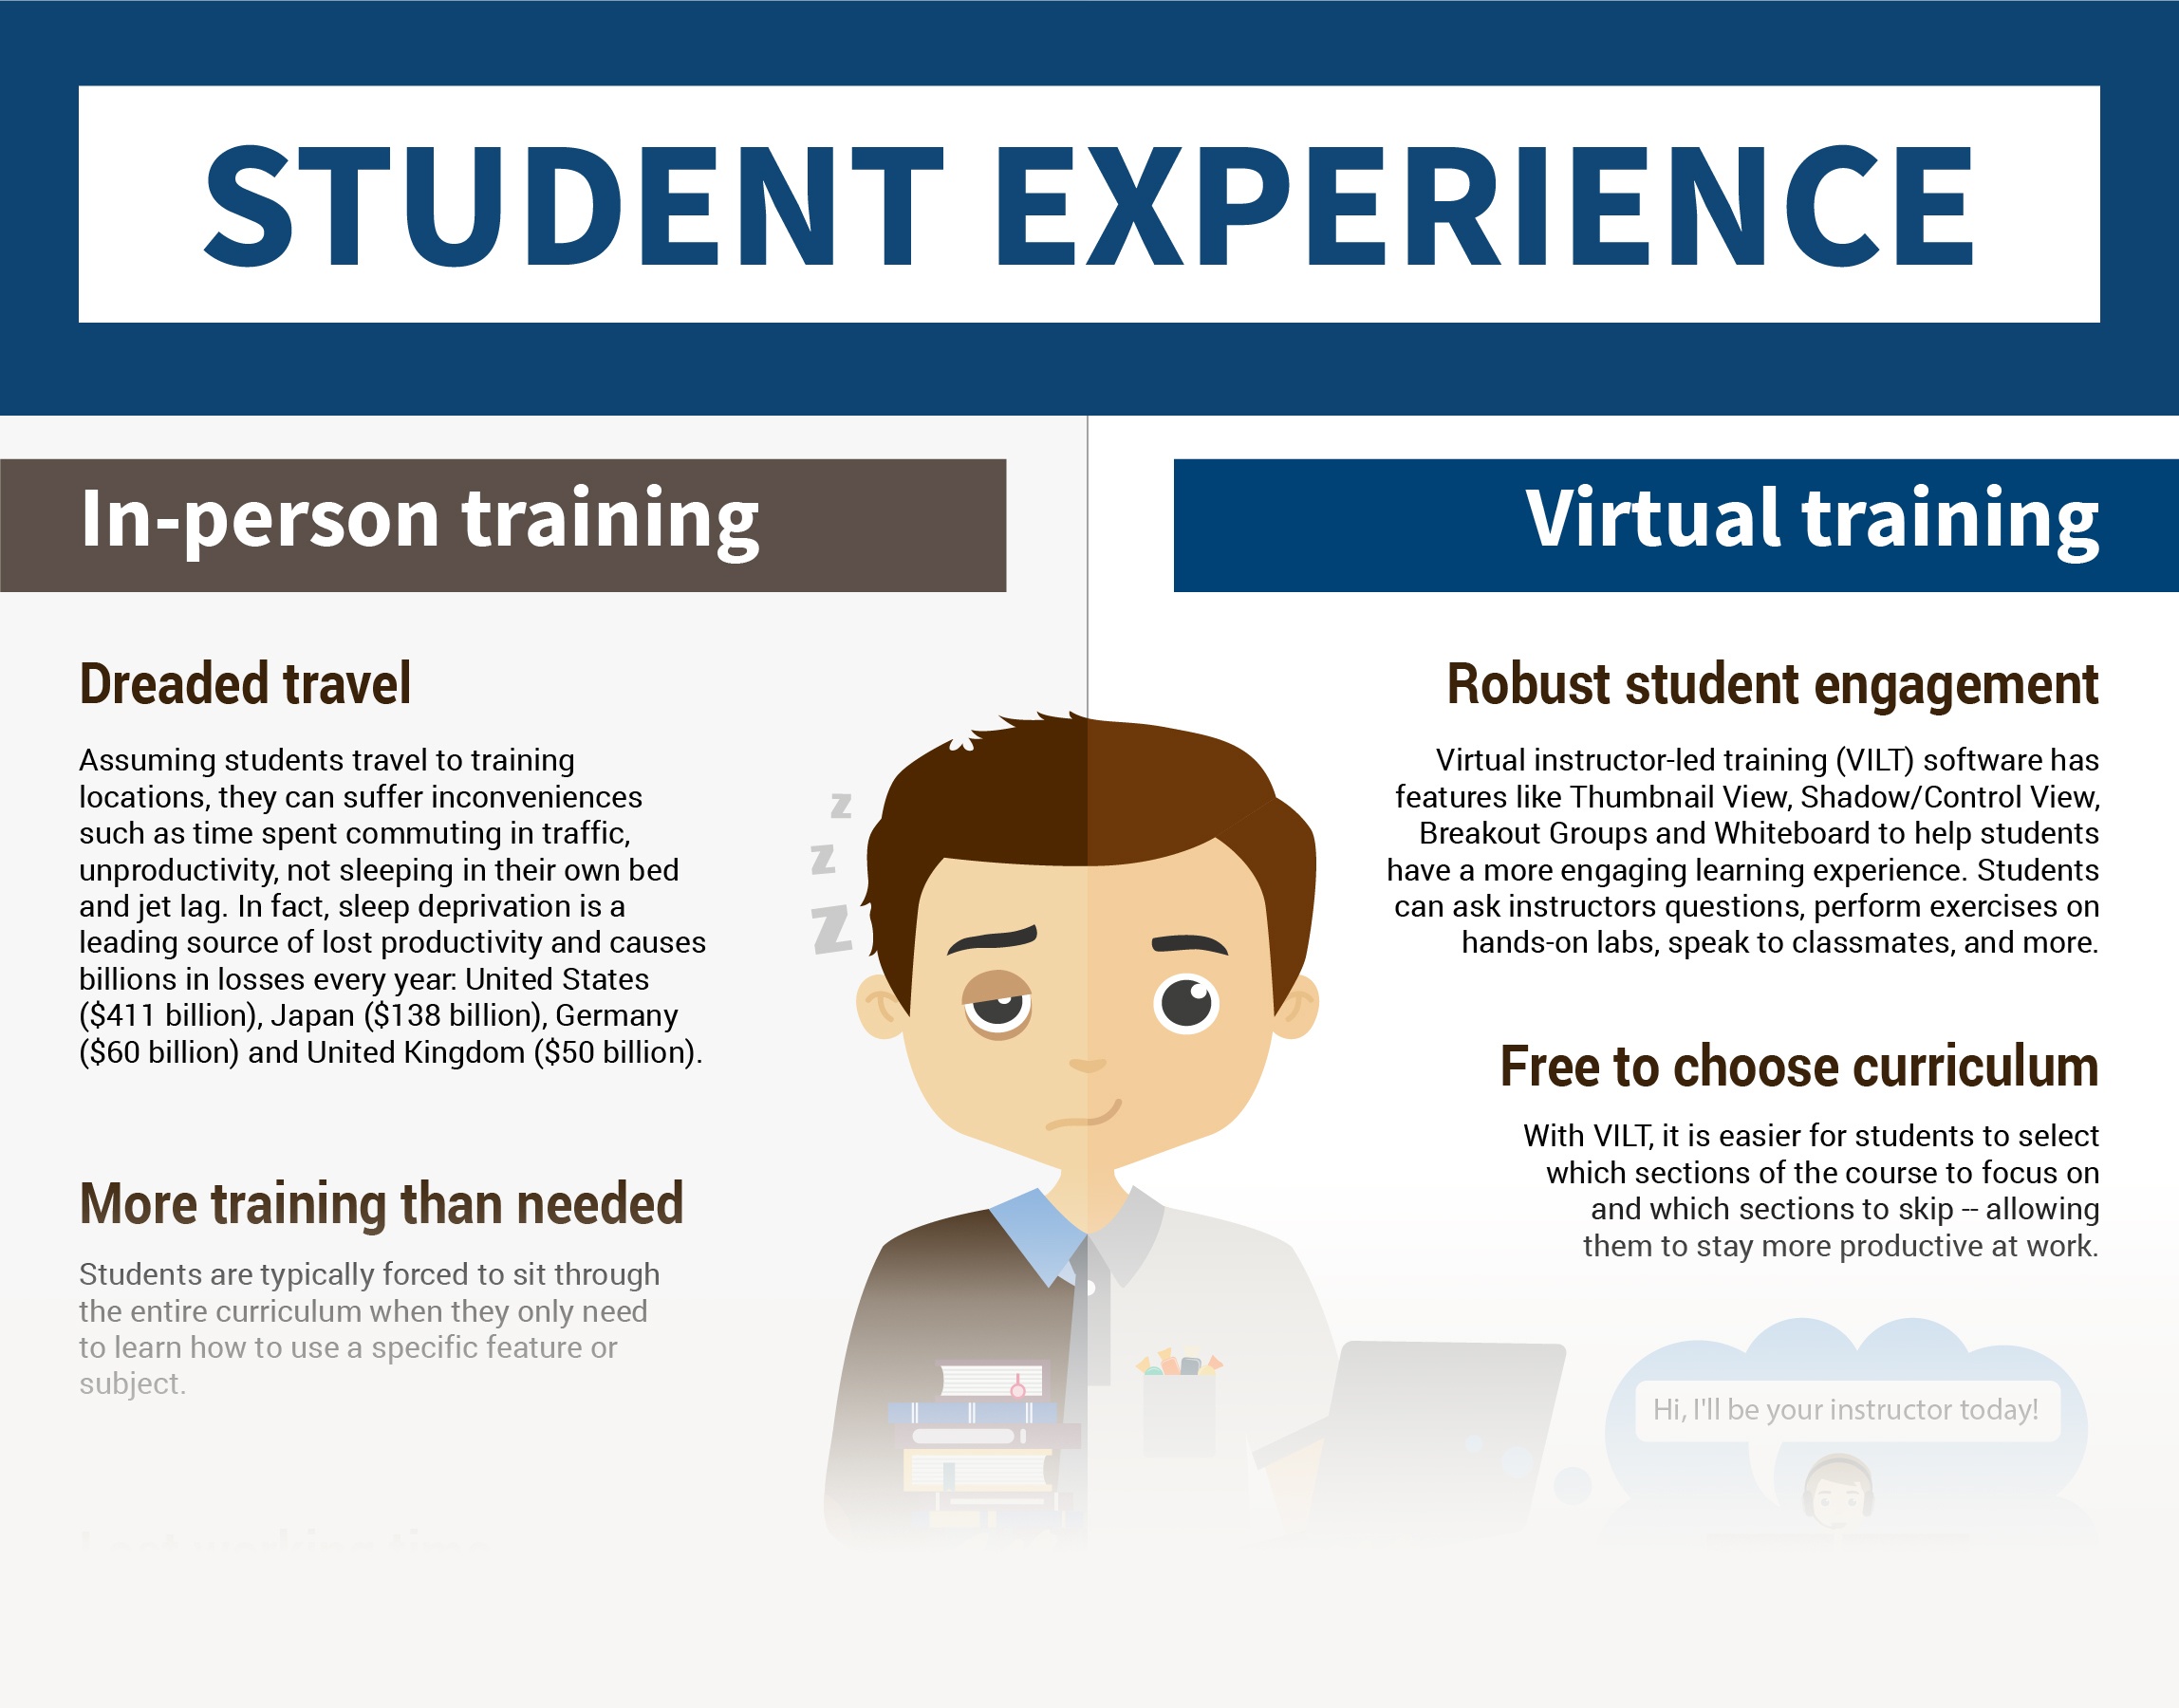 Online vs. In-Person Student Training - Final